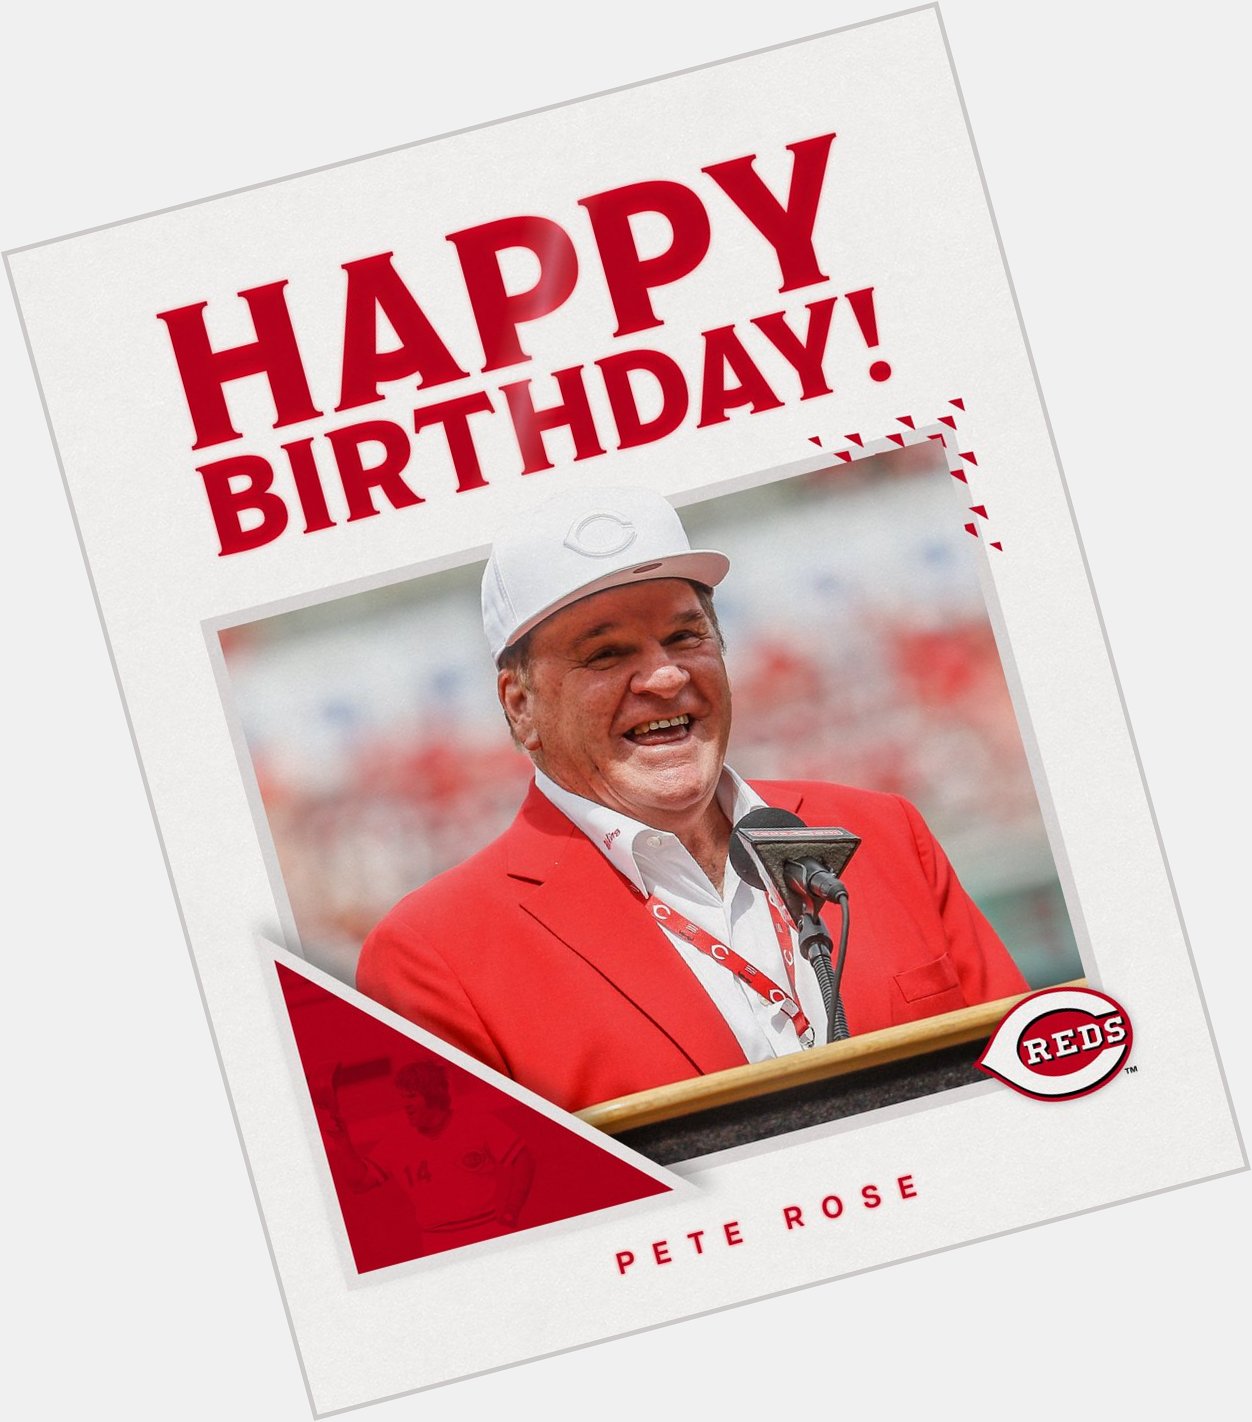  The Hit King turns 81 today! Happy birthday, Pete Rose! 